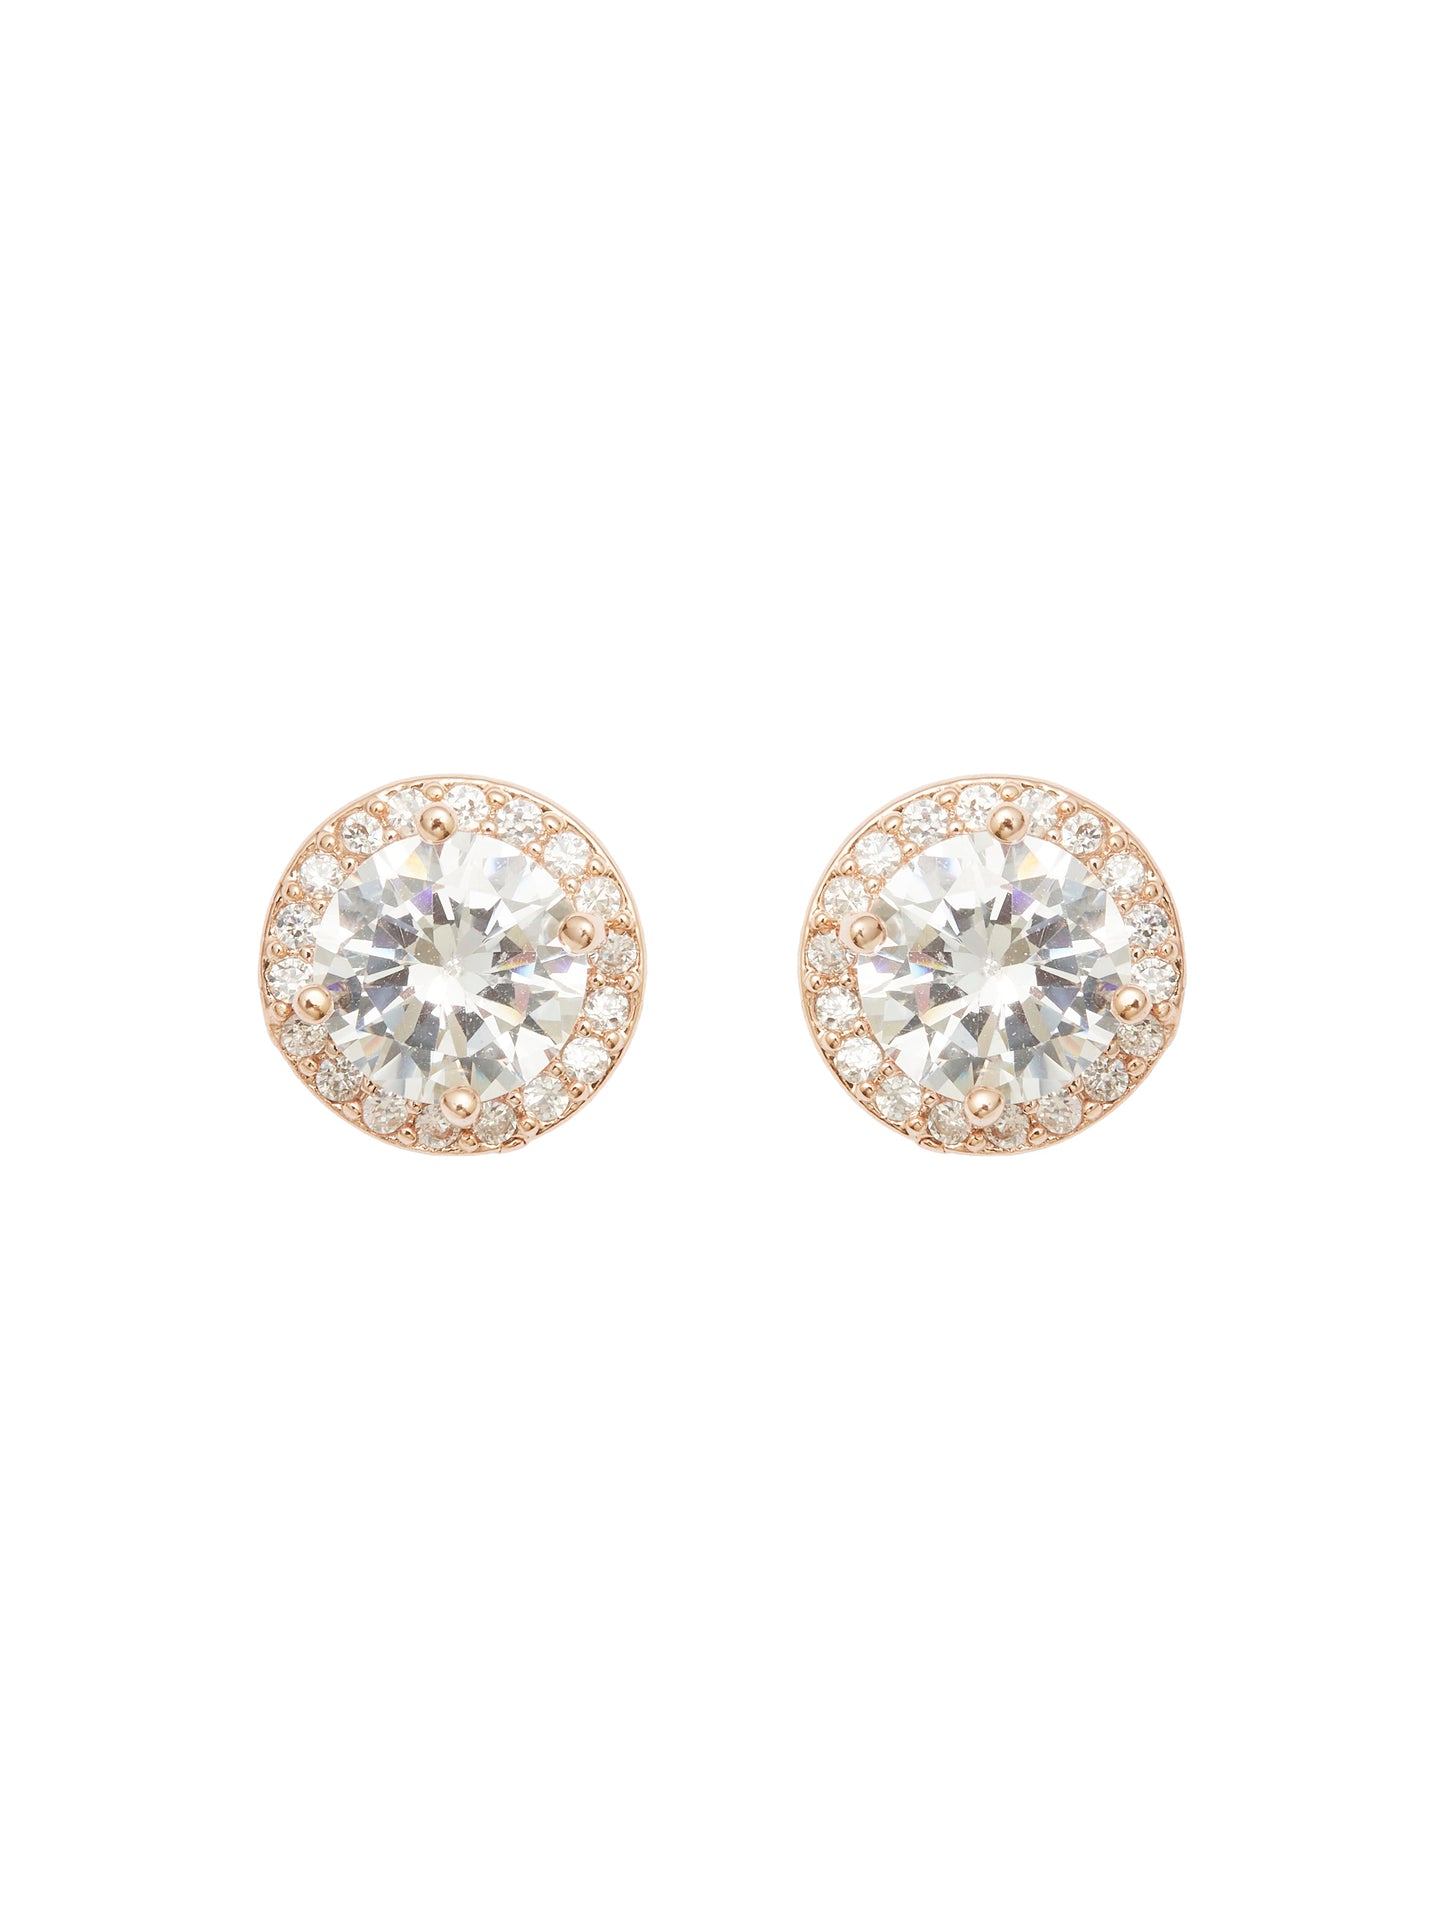 Rina Rose Gold Earrings by Montique